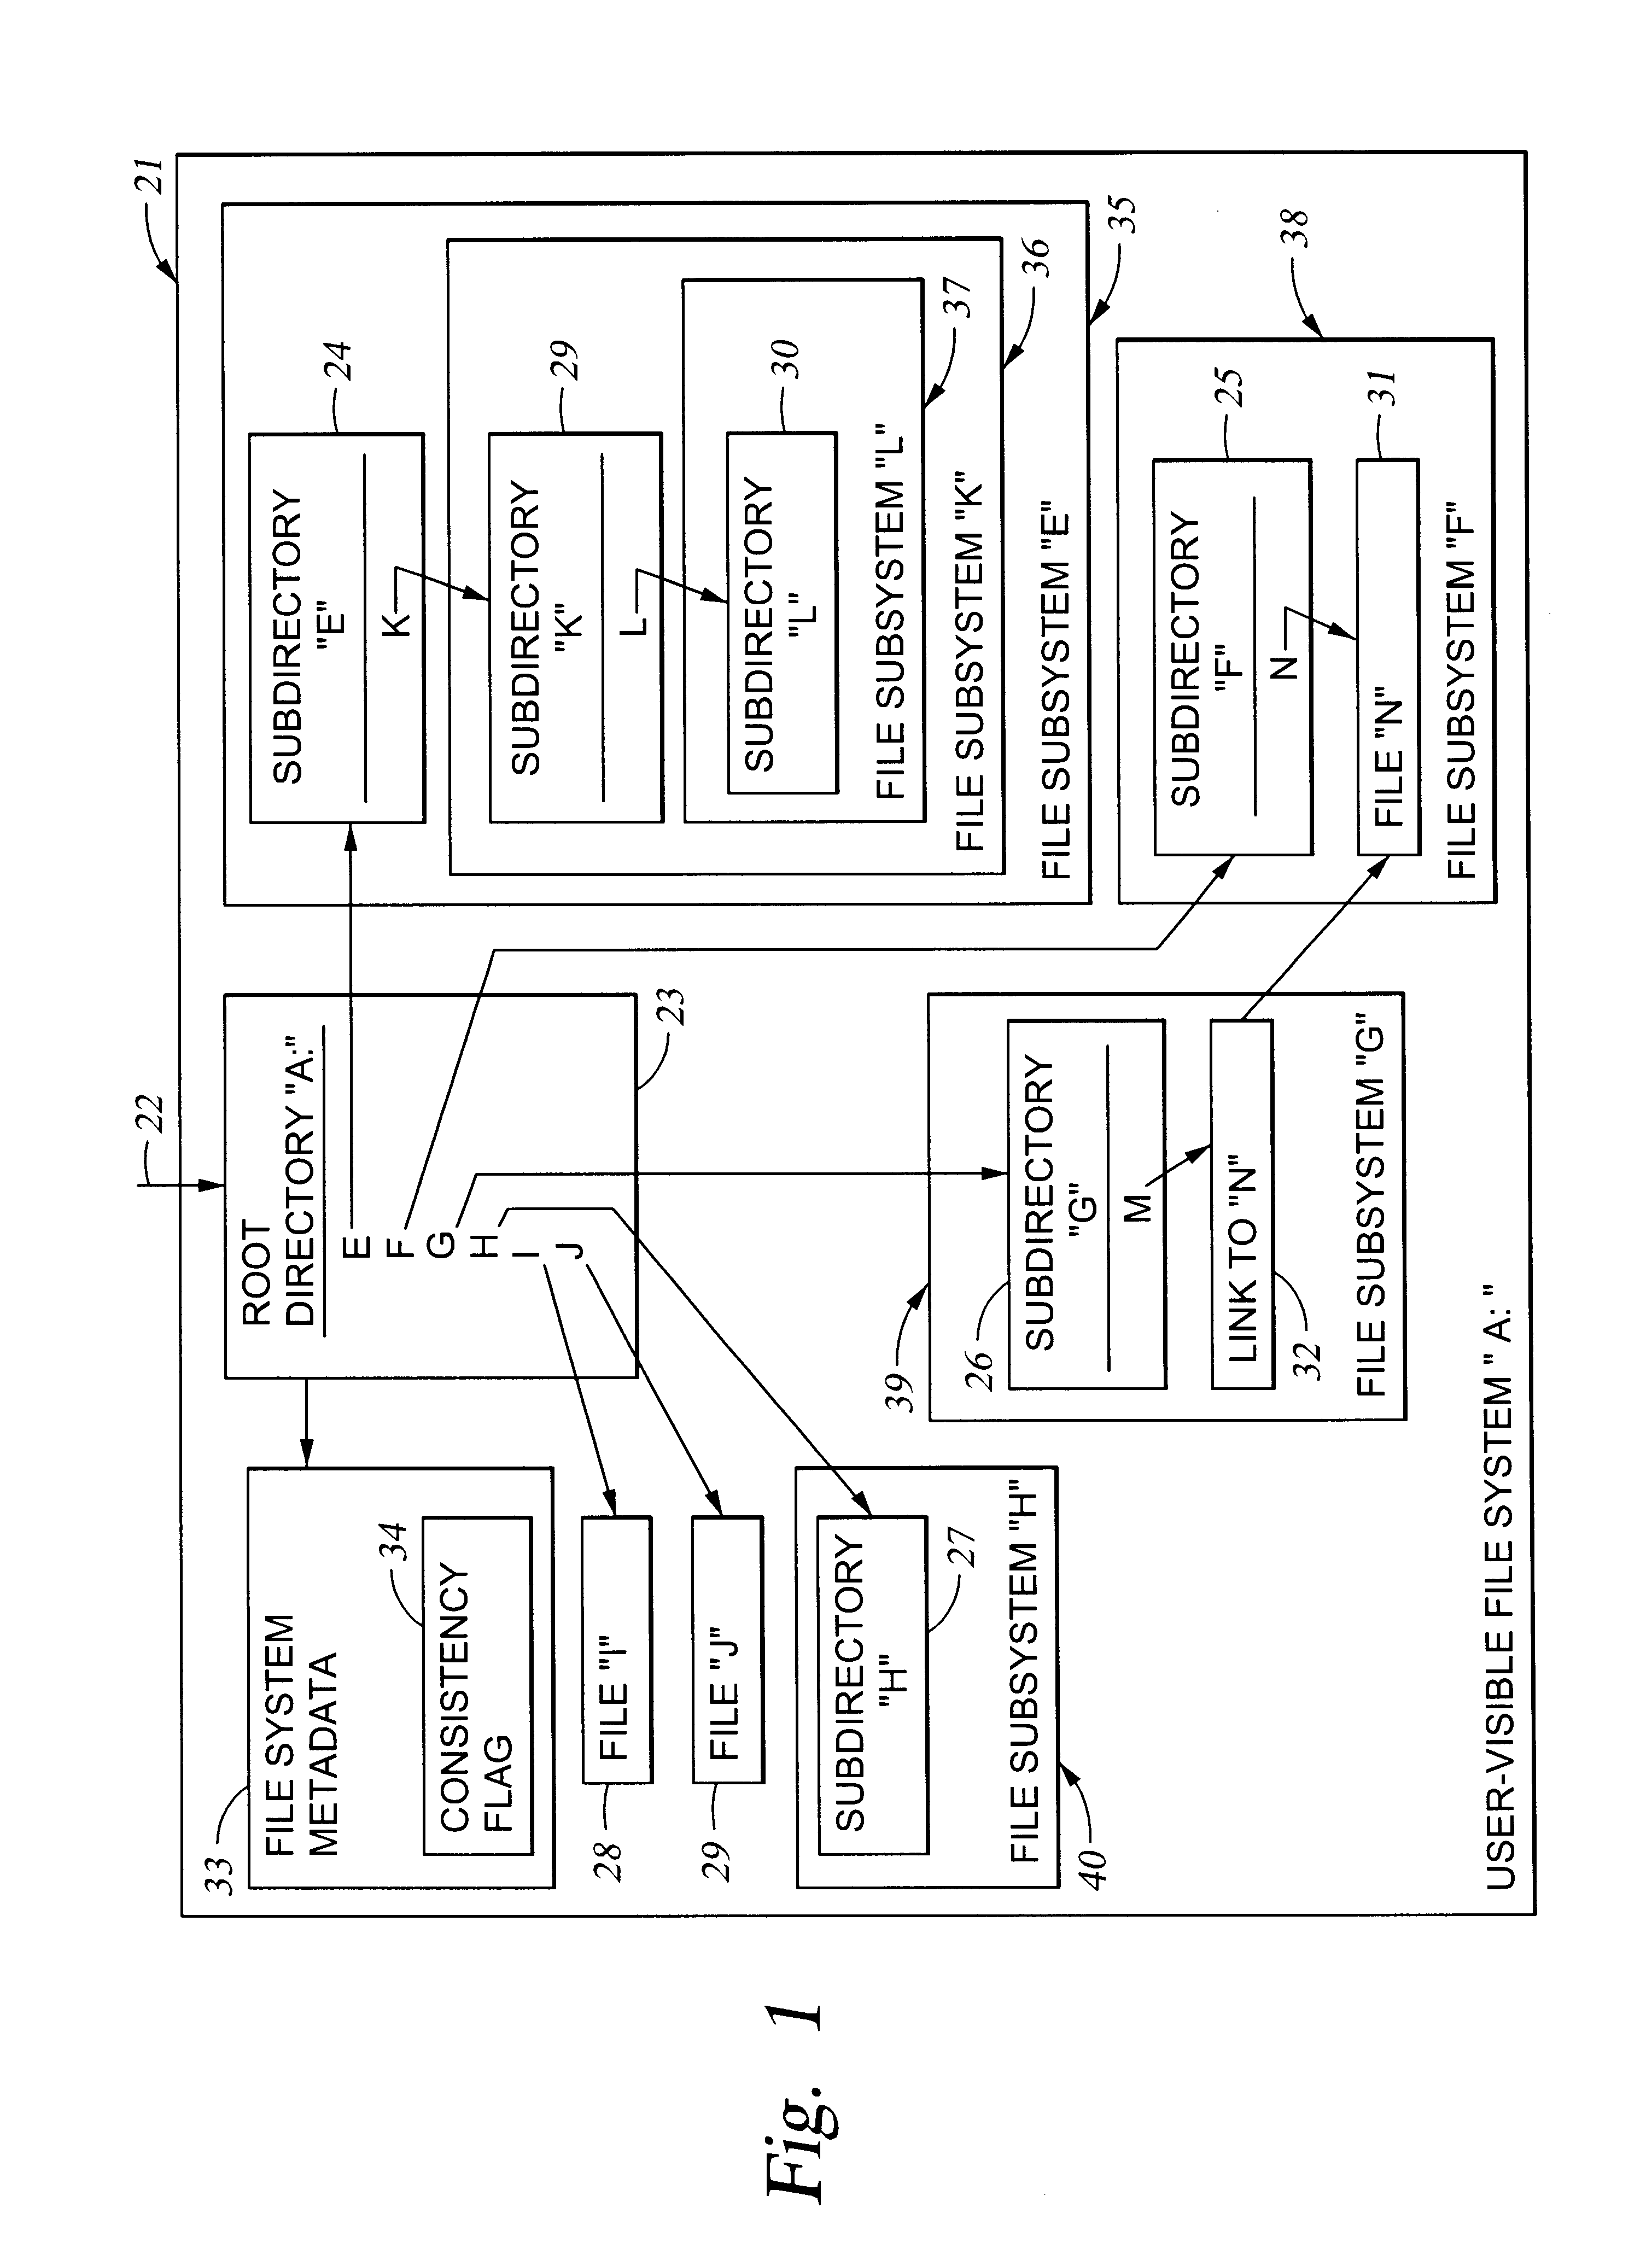 Building a meta file system from file system cells